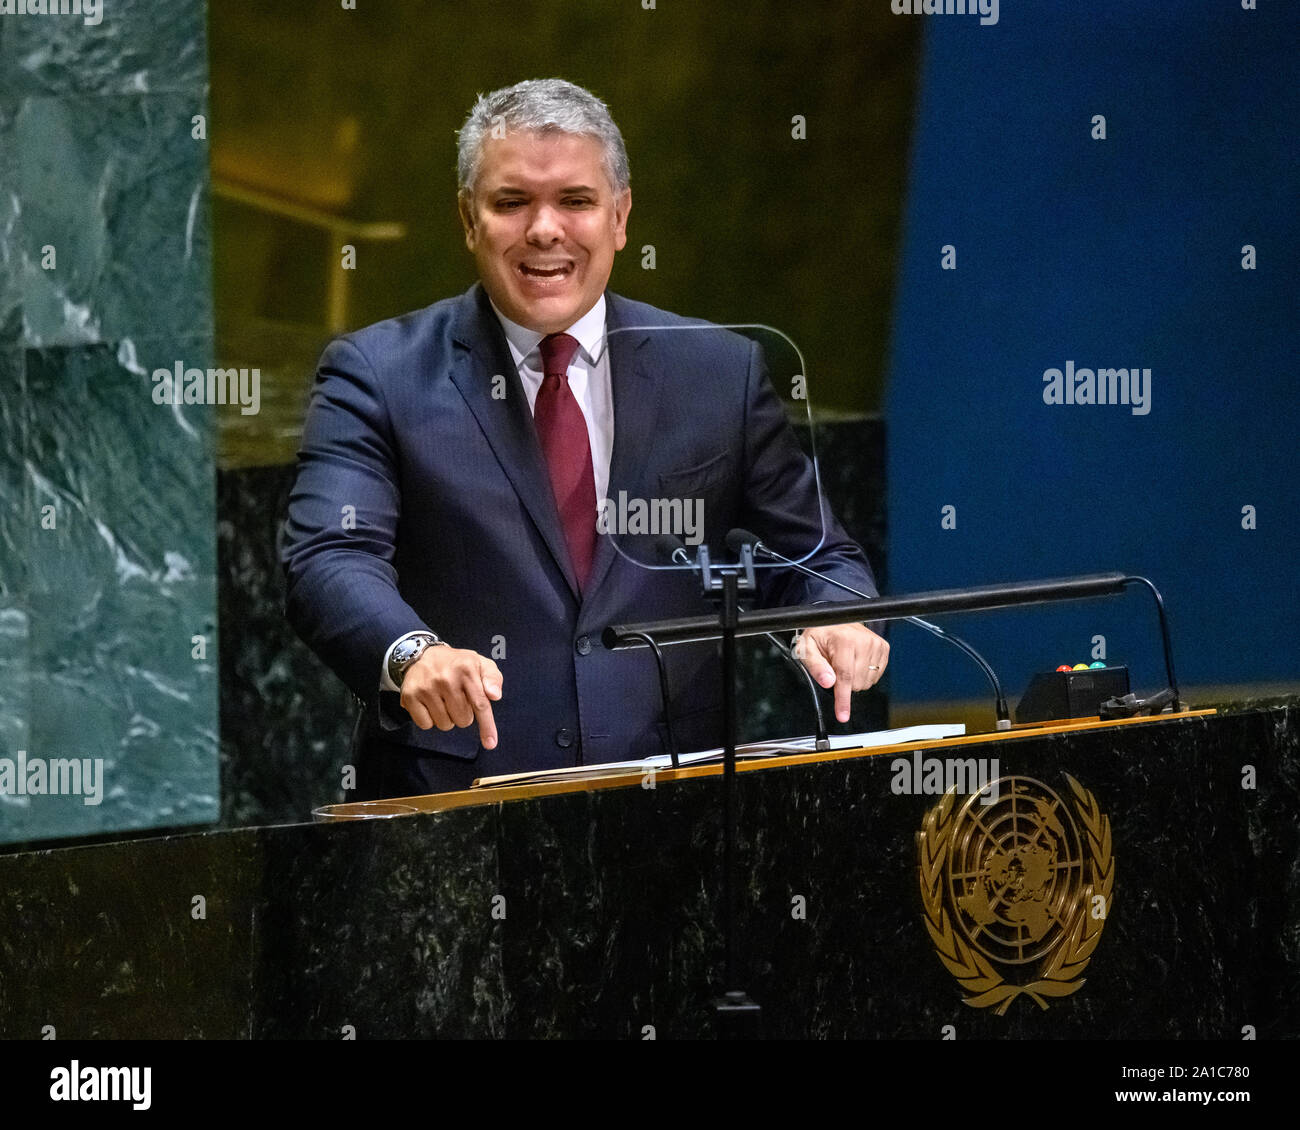 New York, USA. 25th Sep, 2019. Colombian President Iván Duque Márquez addresses the United Nations General Assembly. Credit: Enrique Shore/Alamy Live News Stock Photo